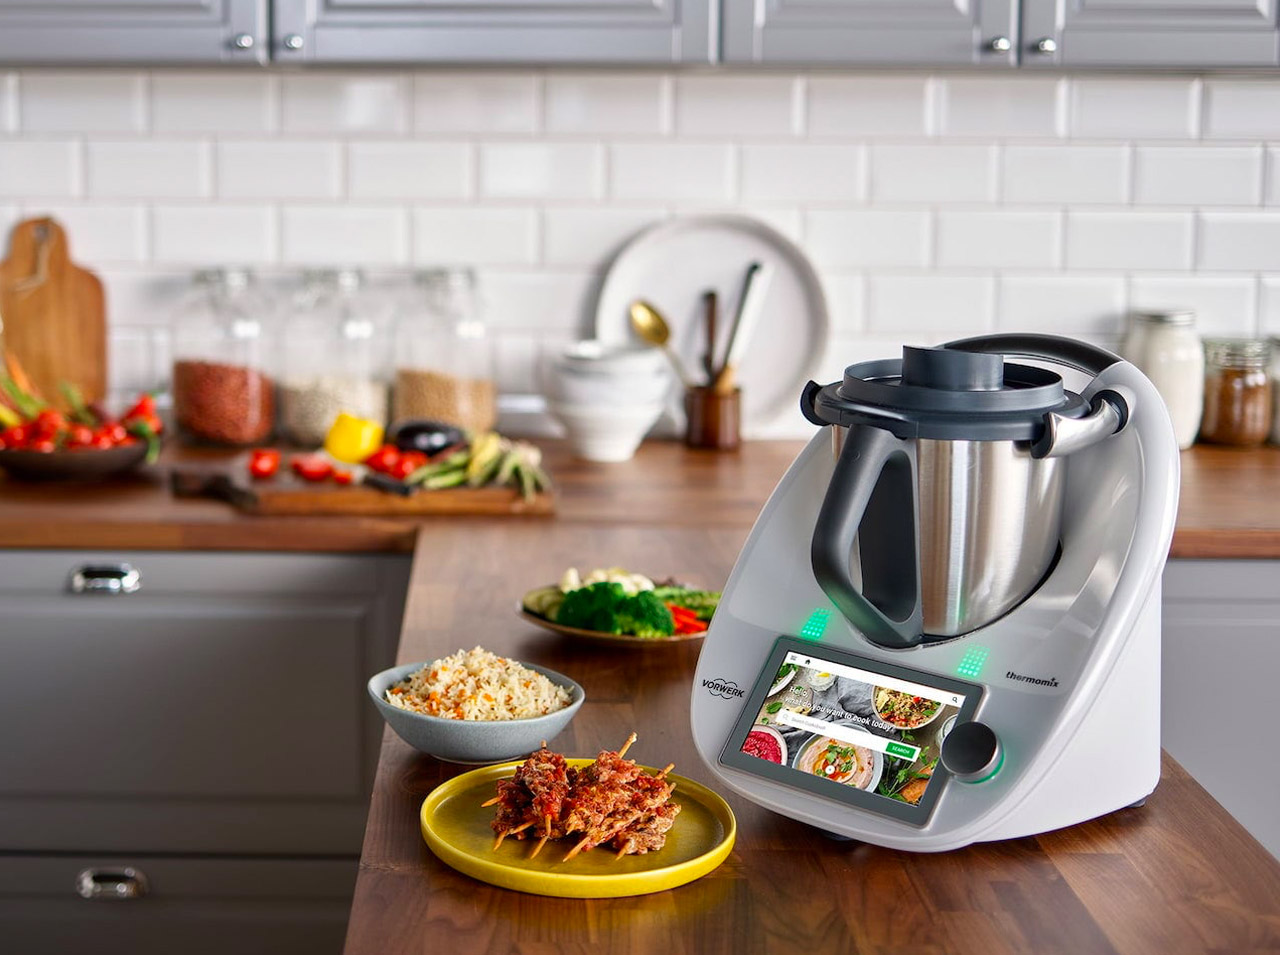 Find Marvelous, Advanced and Durable Japanese Kitchen Appliances 